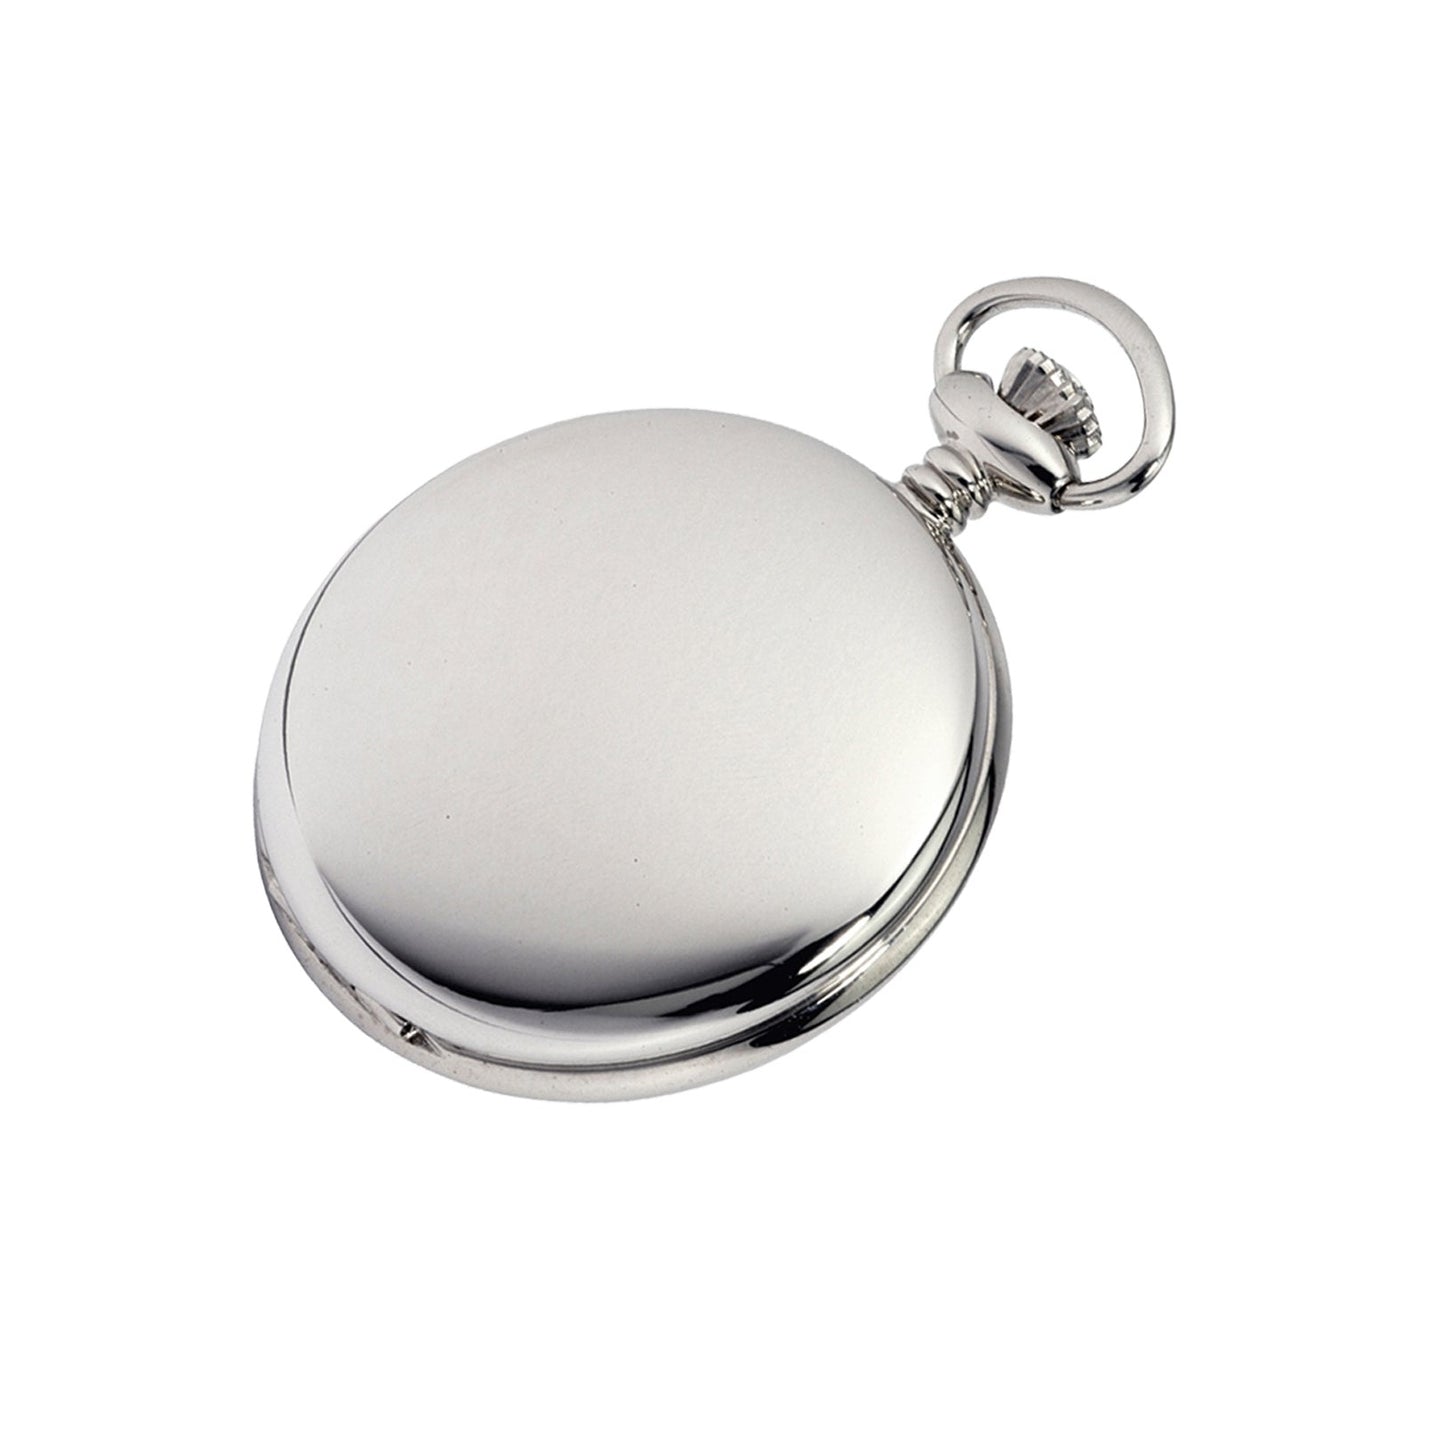 Woodford 50mm Chrome Plated Full Hunter Pocket Watch